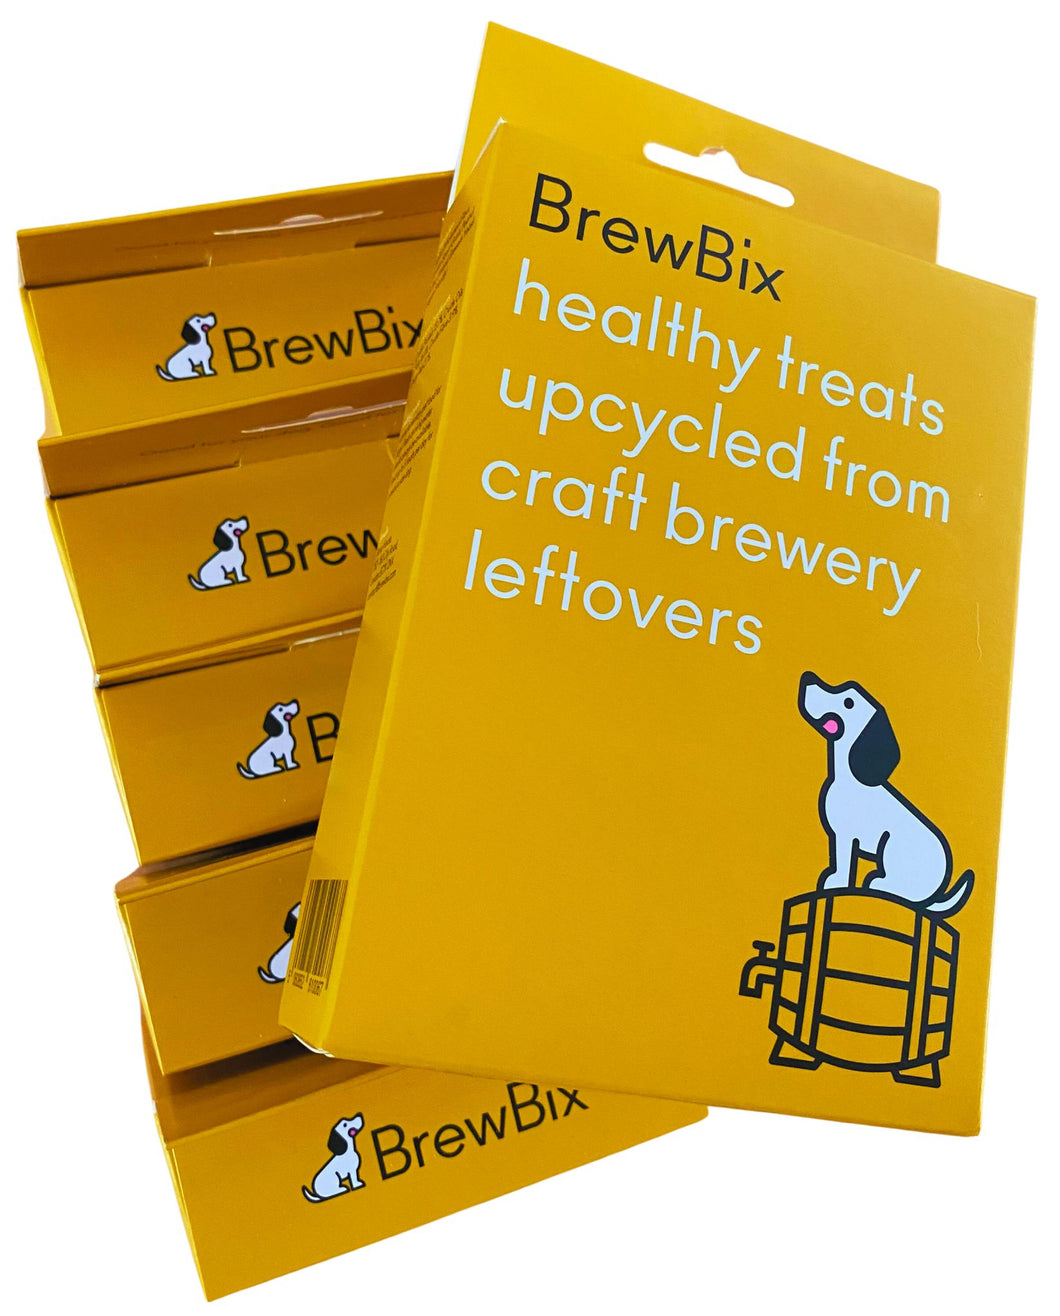 BrewBix Healthy Peanut Butter Dog Treat Biscuits - 6 x 100g Boxes